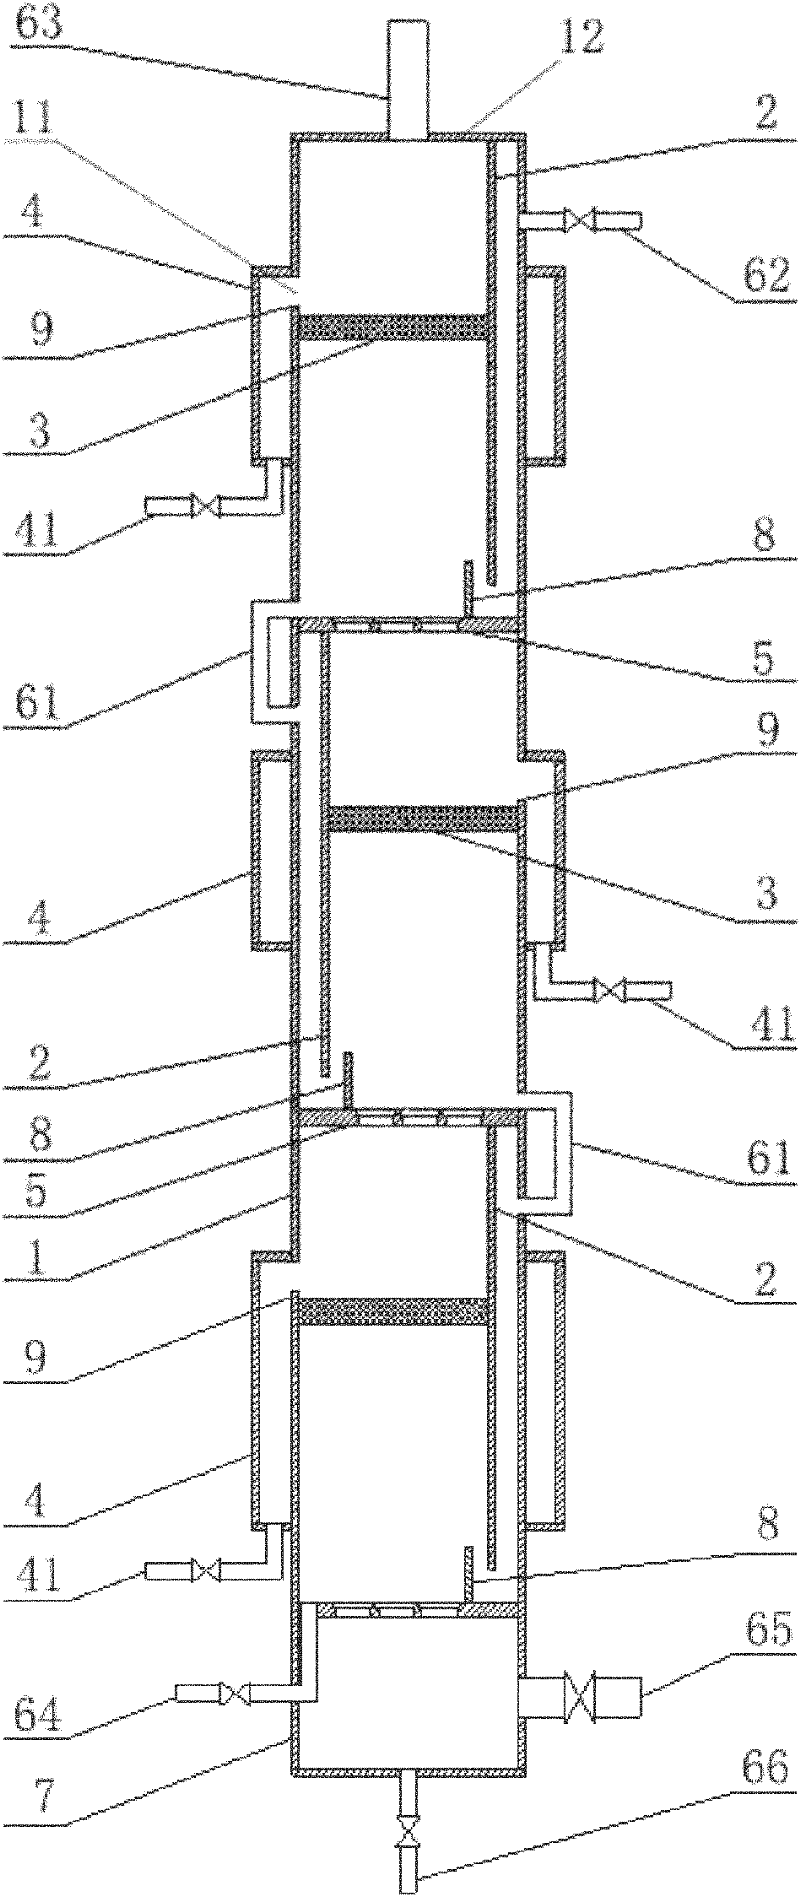 Multistage tower-type flotation device for treating oily sewage